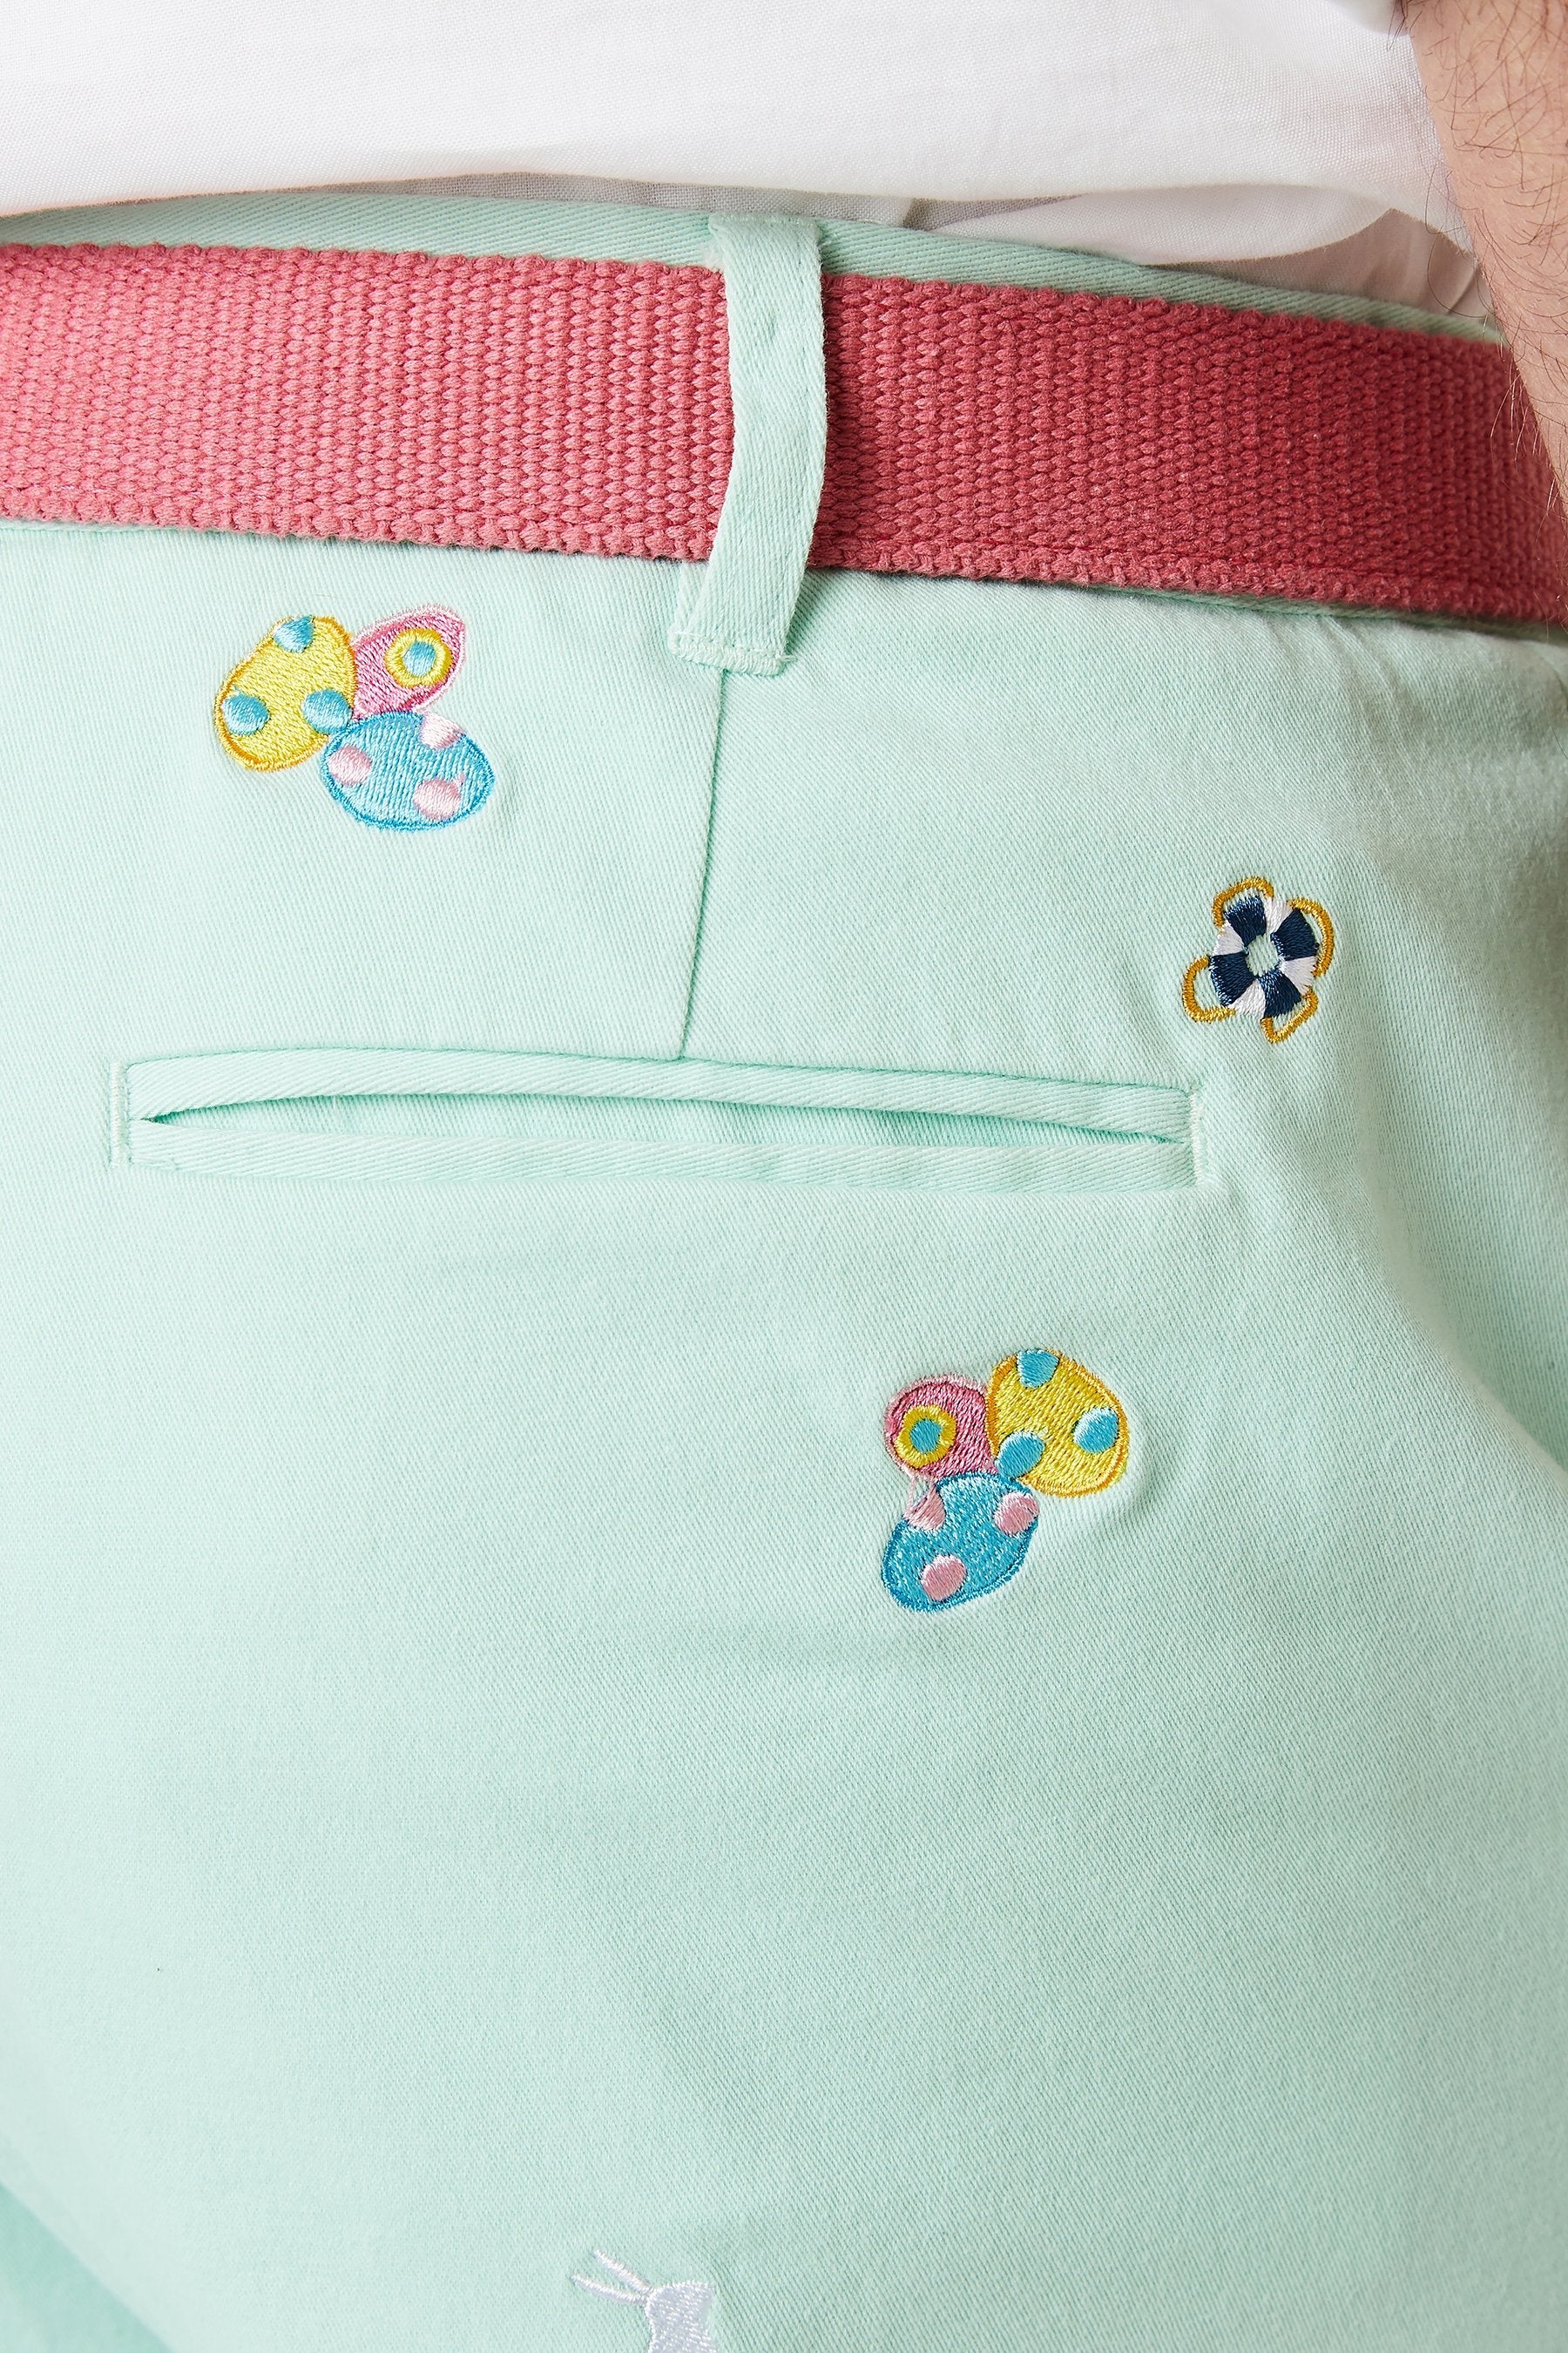 Harbor Pant Stretch Twill Mint with Easter Eggs and Bunny